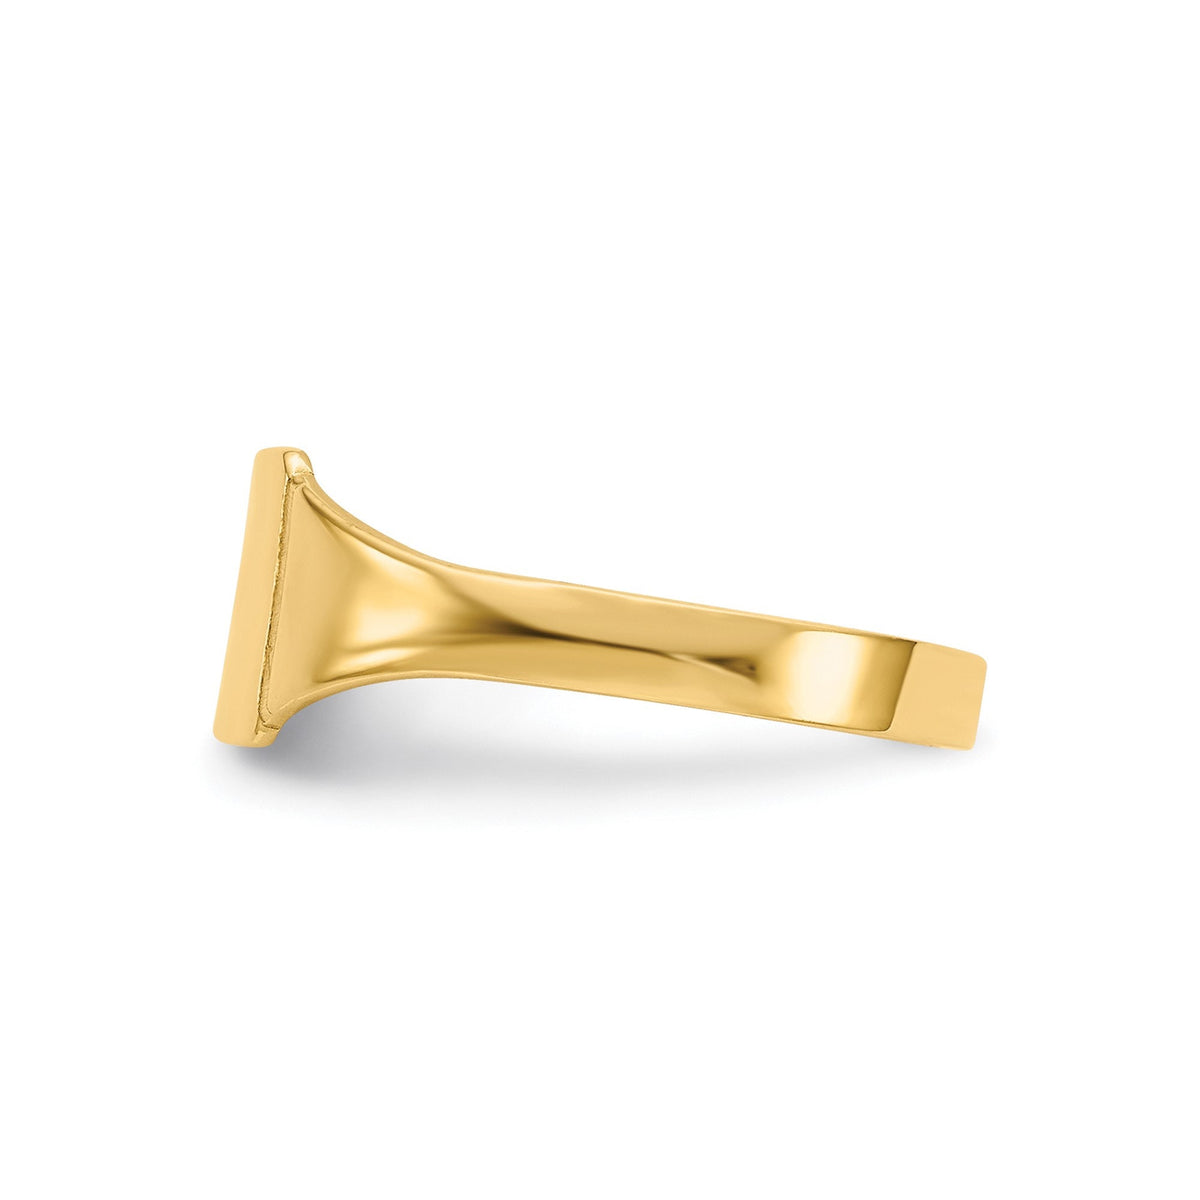 14k Yellow Gold Square Signet Baby to Toddler/Ring Size 2 - 5.25 (2+ year olds) Toddler/Children's/Small Fingers / Gift Box Included